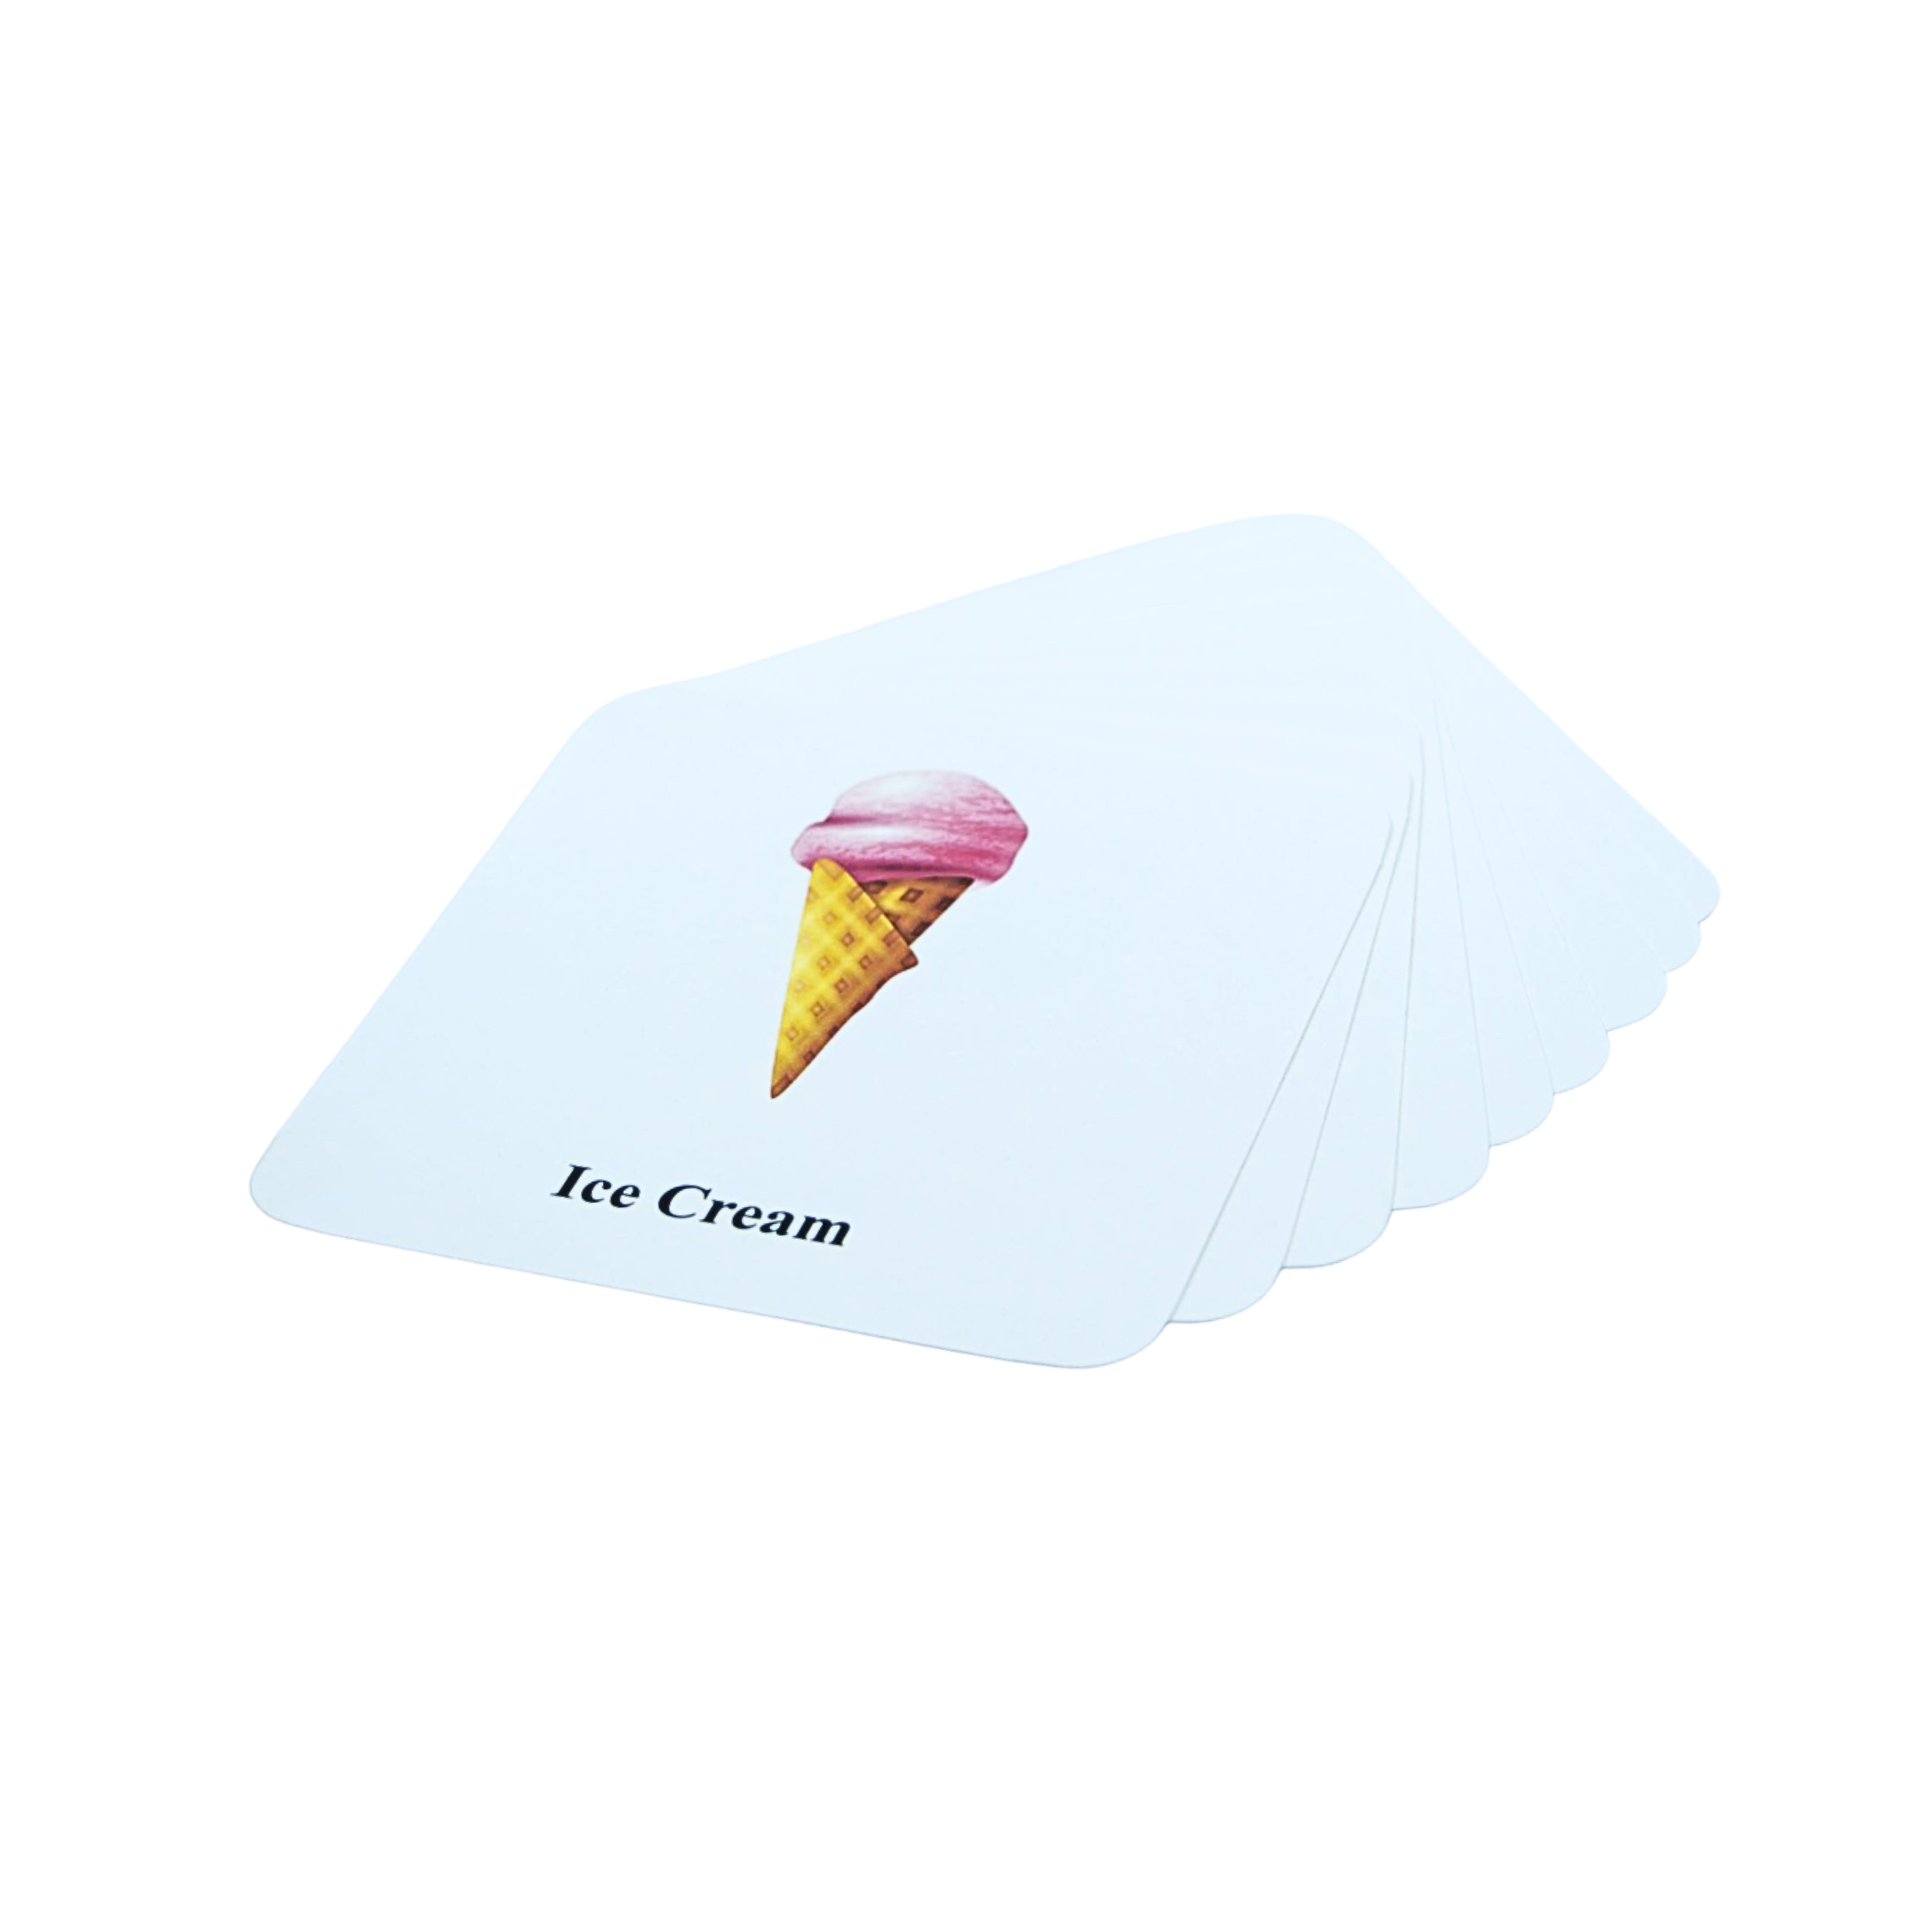 Foods Cards